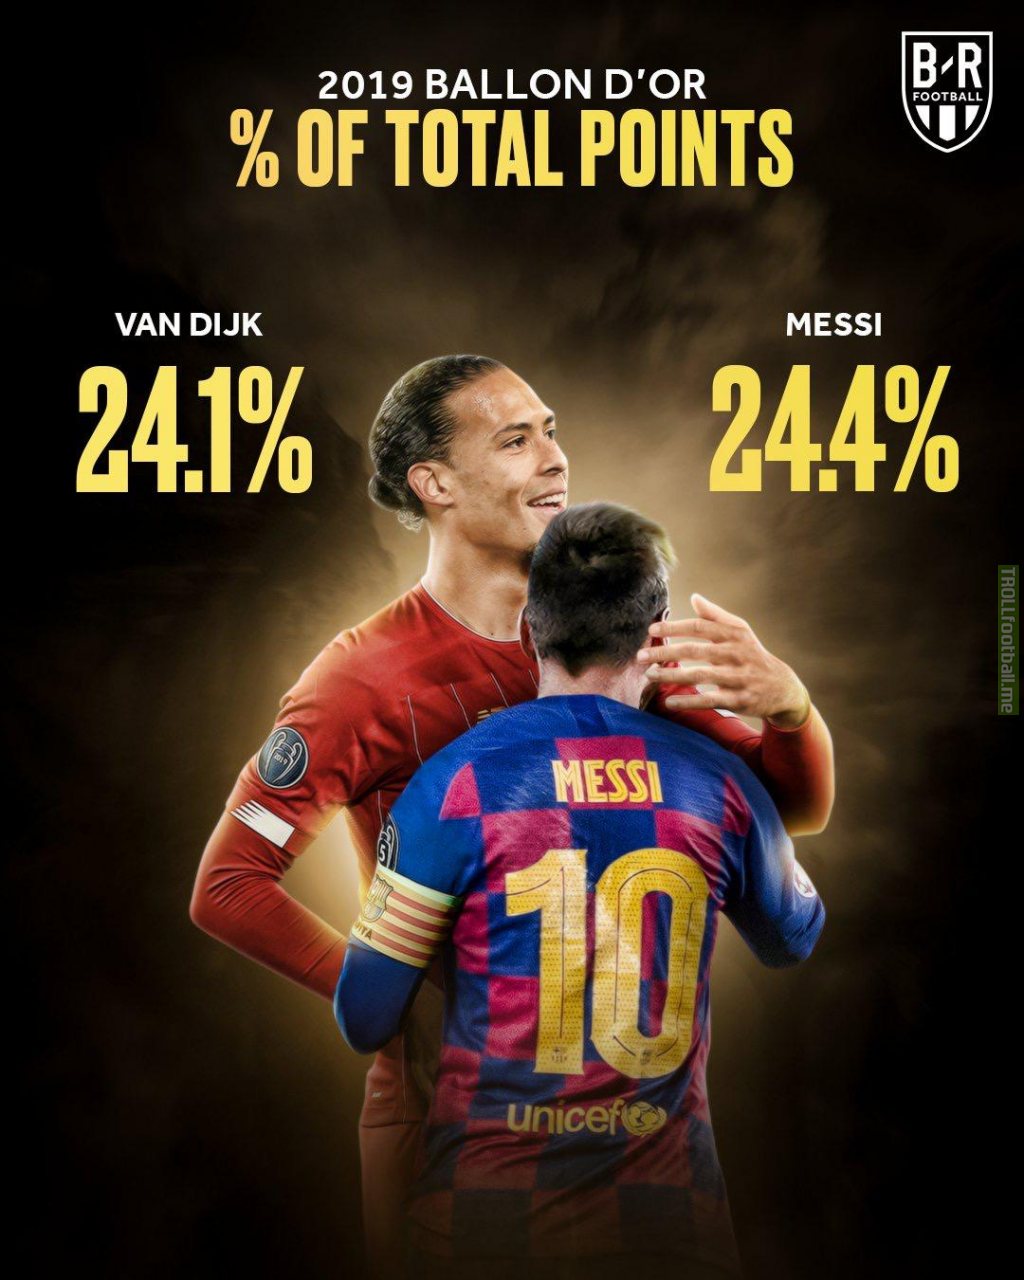 Messi vs Van Dijk was the closest Ballon d’Or race between first and second place. Messi won by only 7 votes (0.3% more)